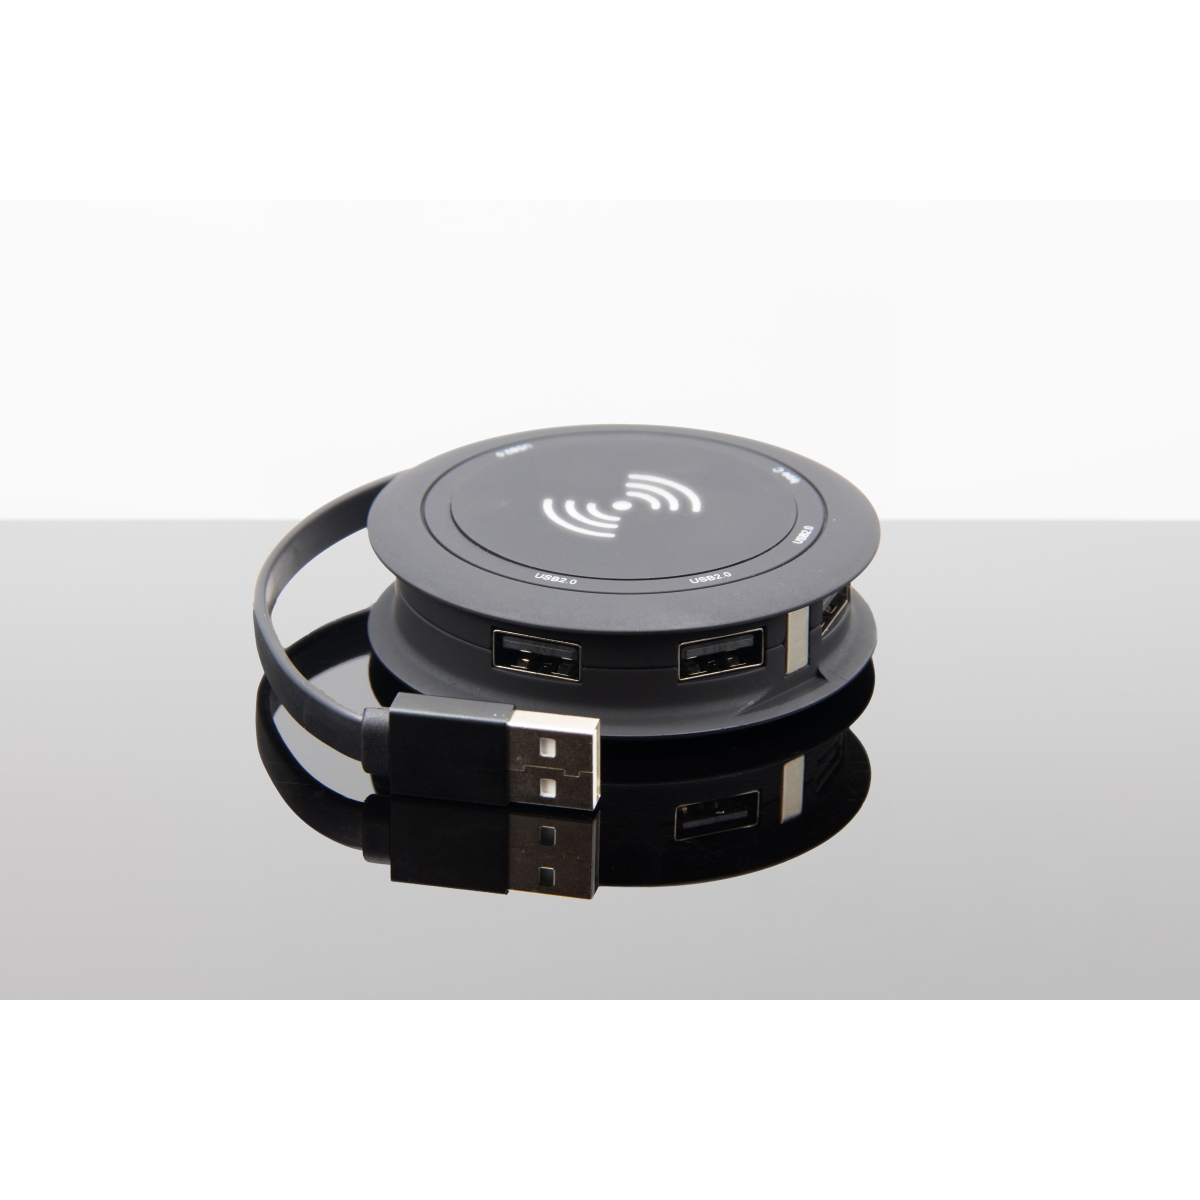 H16 - Wireless charger & 4 Hub